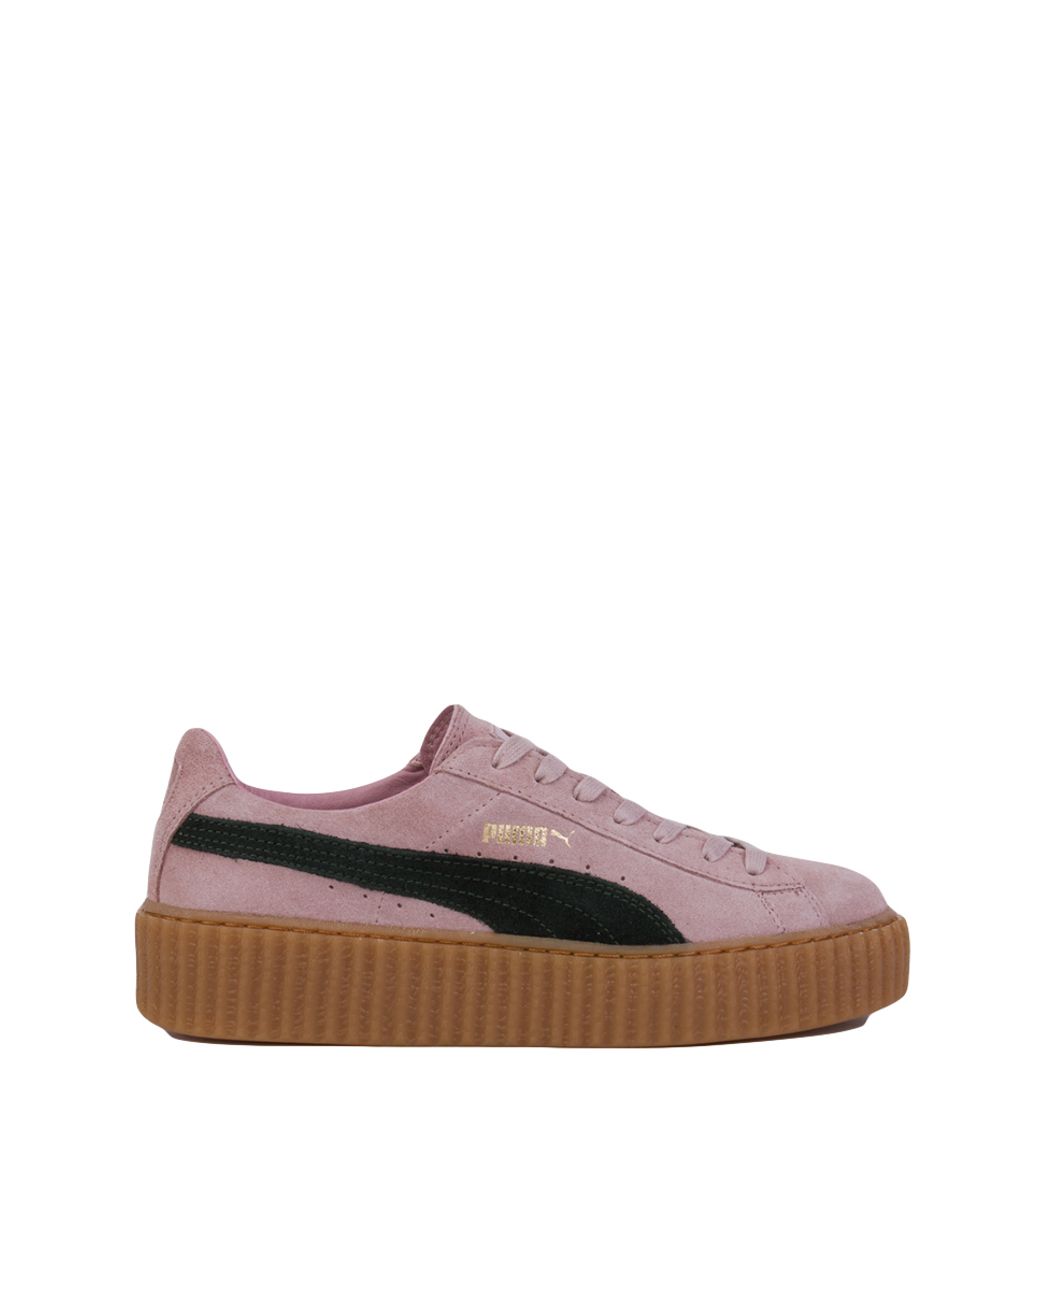 PUMA X Rihanna Suede Creepers in Pink/Green Oatmeal (Pink) | Lyst UK